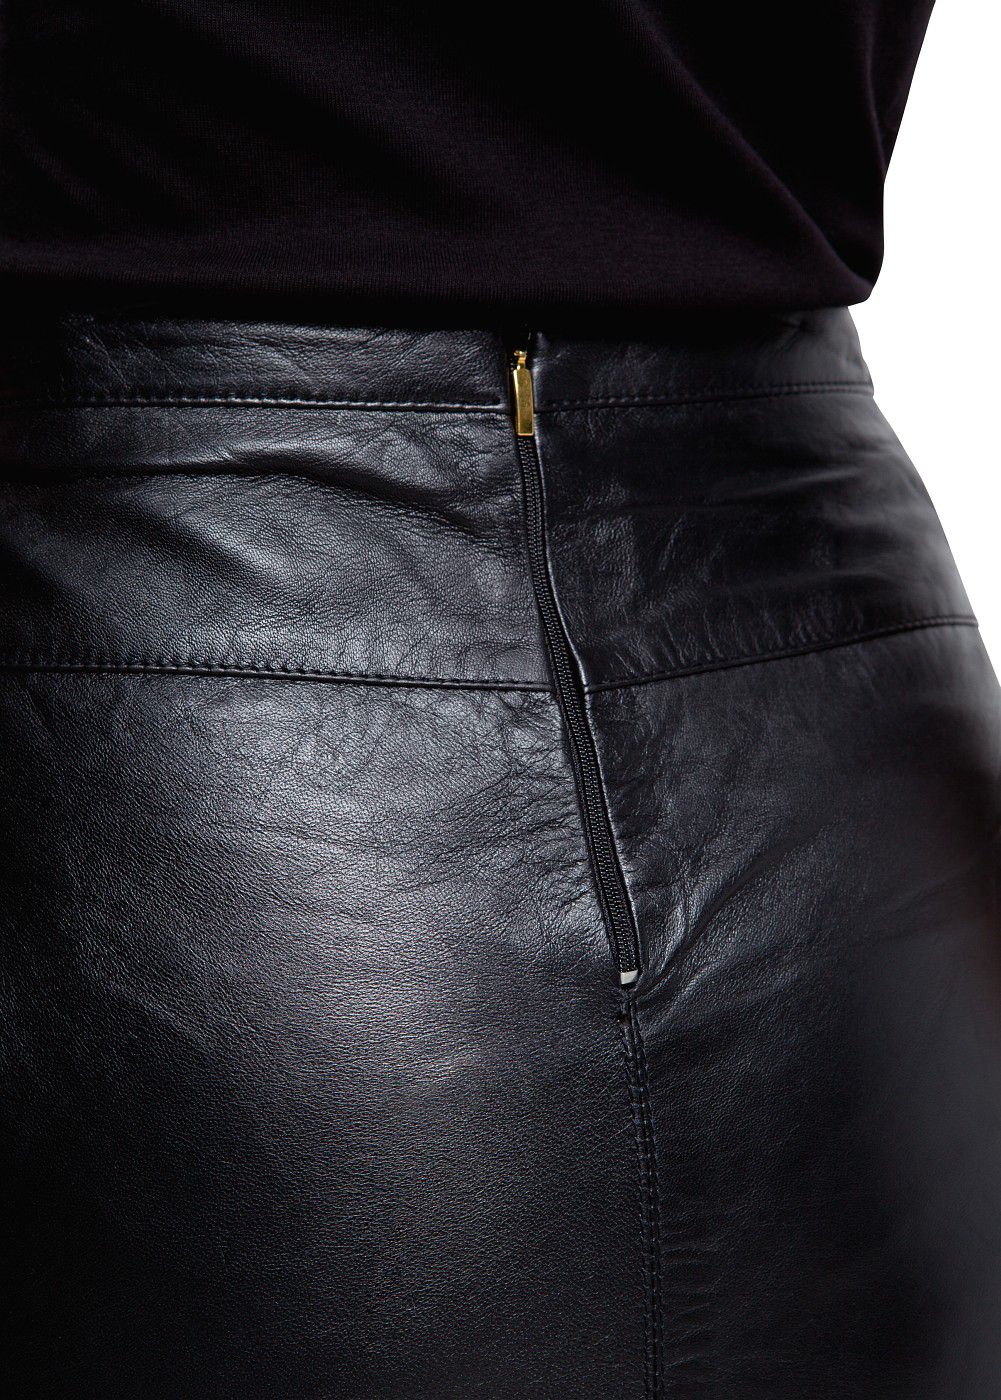 Mango Leather Pencil Skirt in Black | Lyst